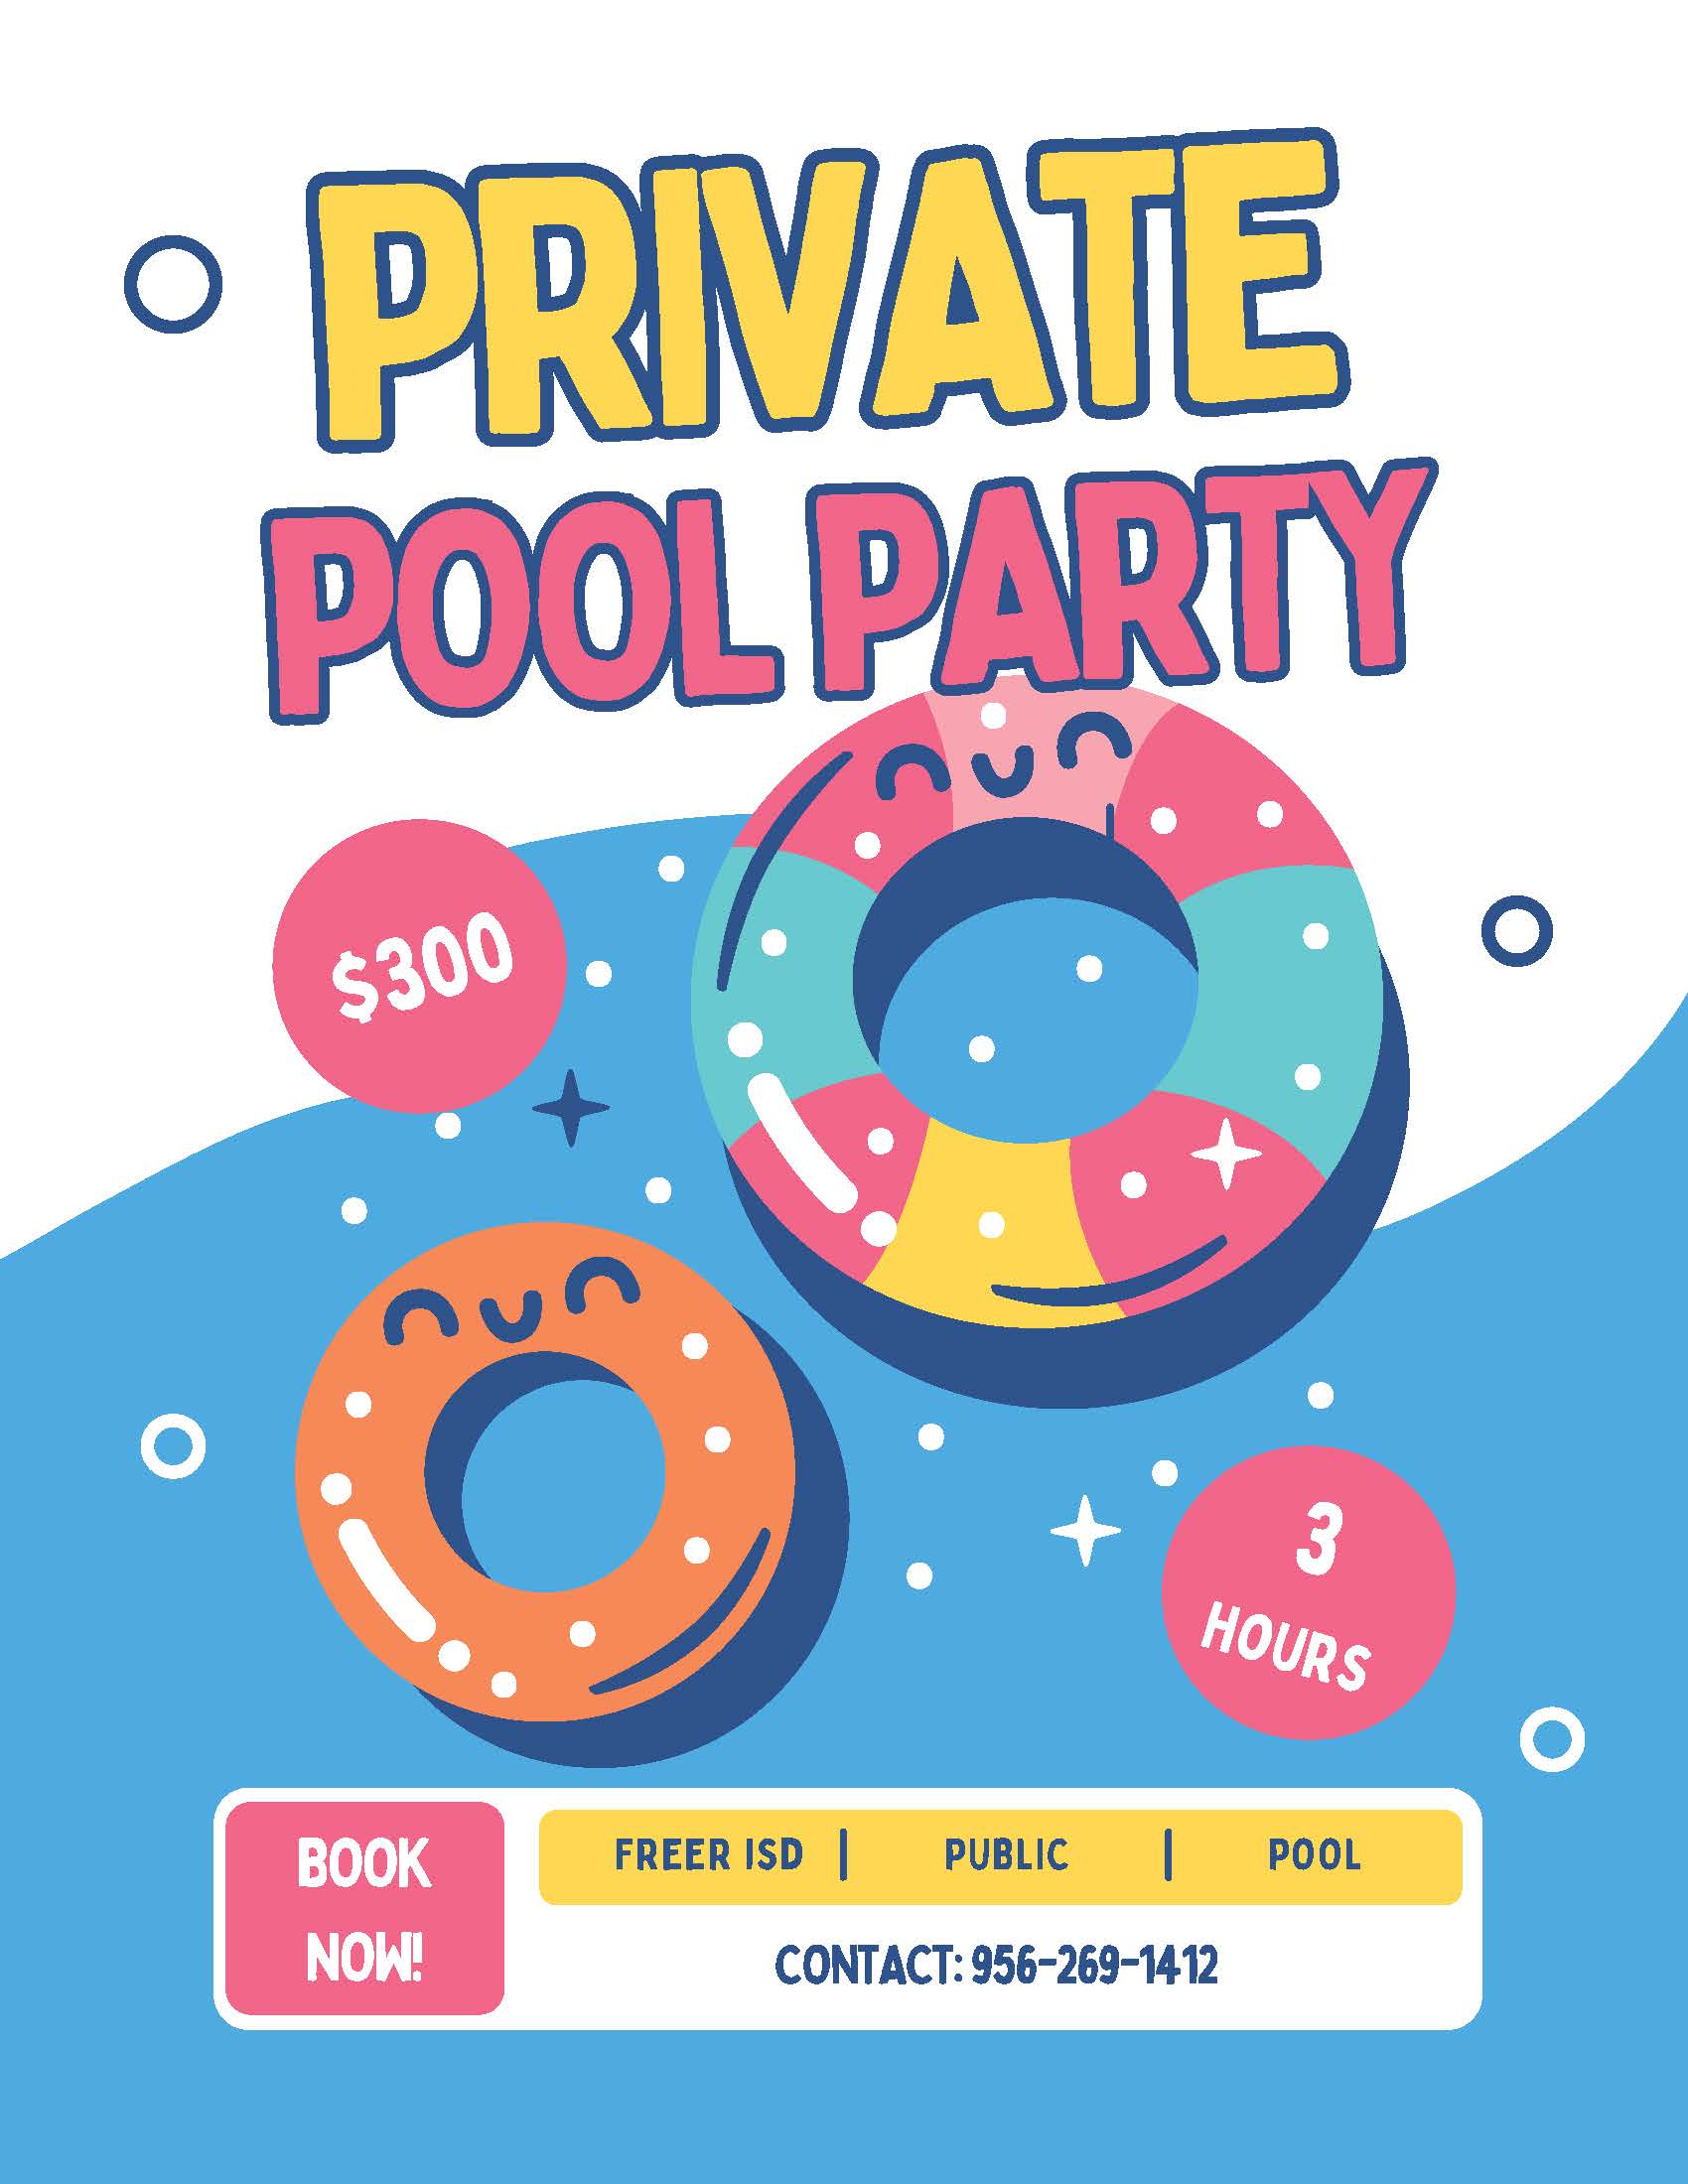 Pool Party Information Flyer